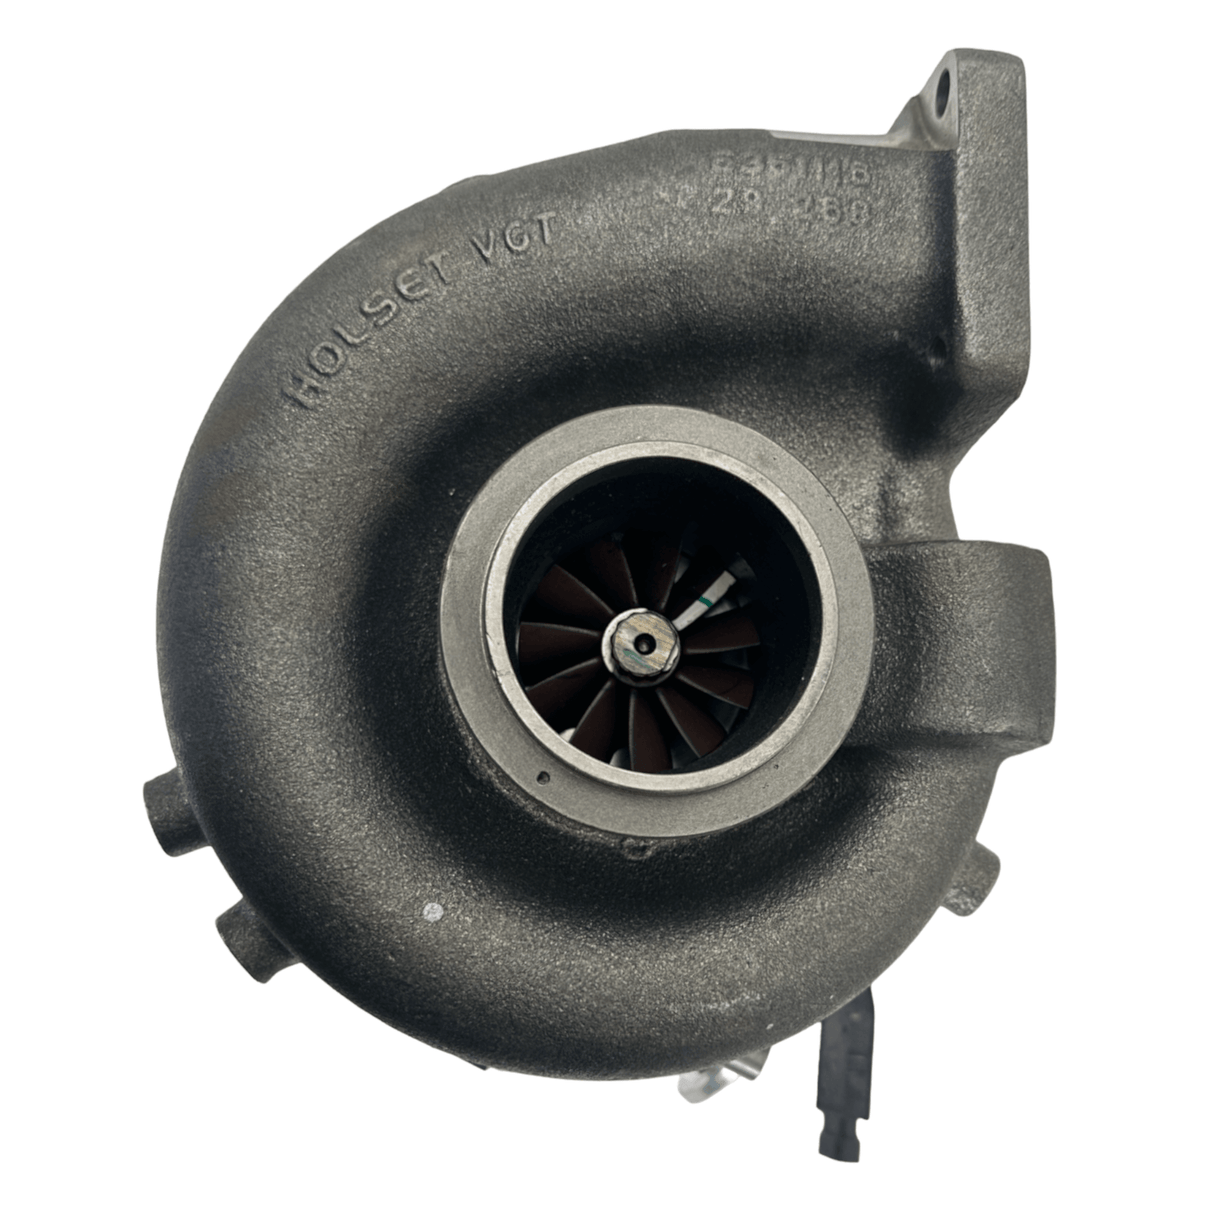 545893700 Genuine Cummins Turbocharger For Isx Isx3 - Truck To Trailer